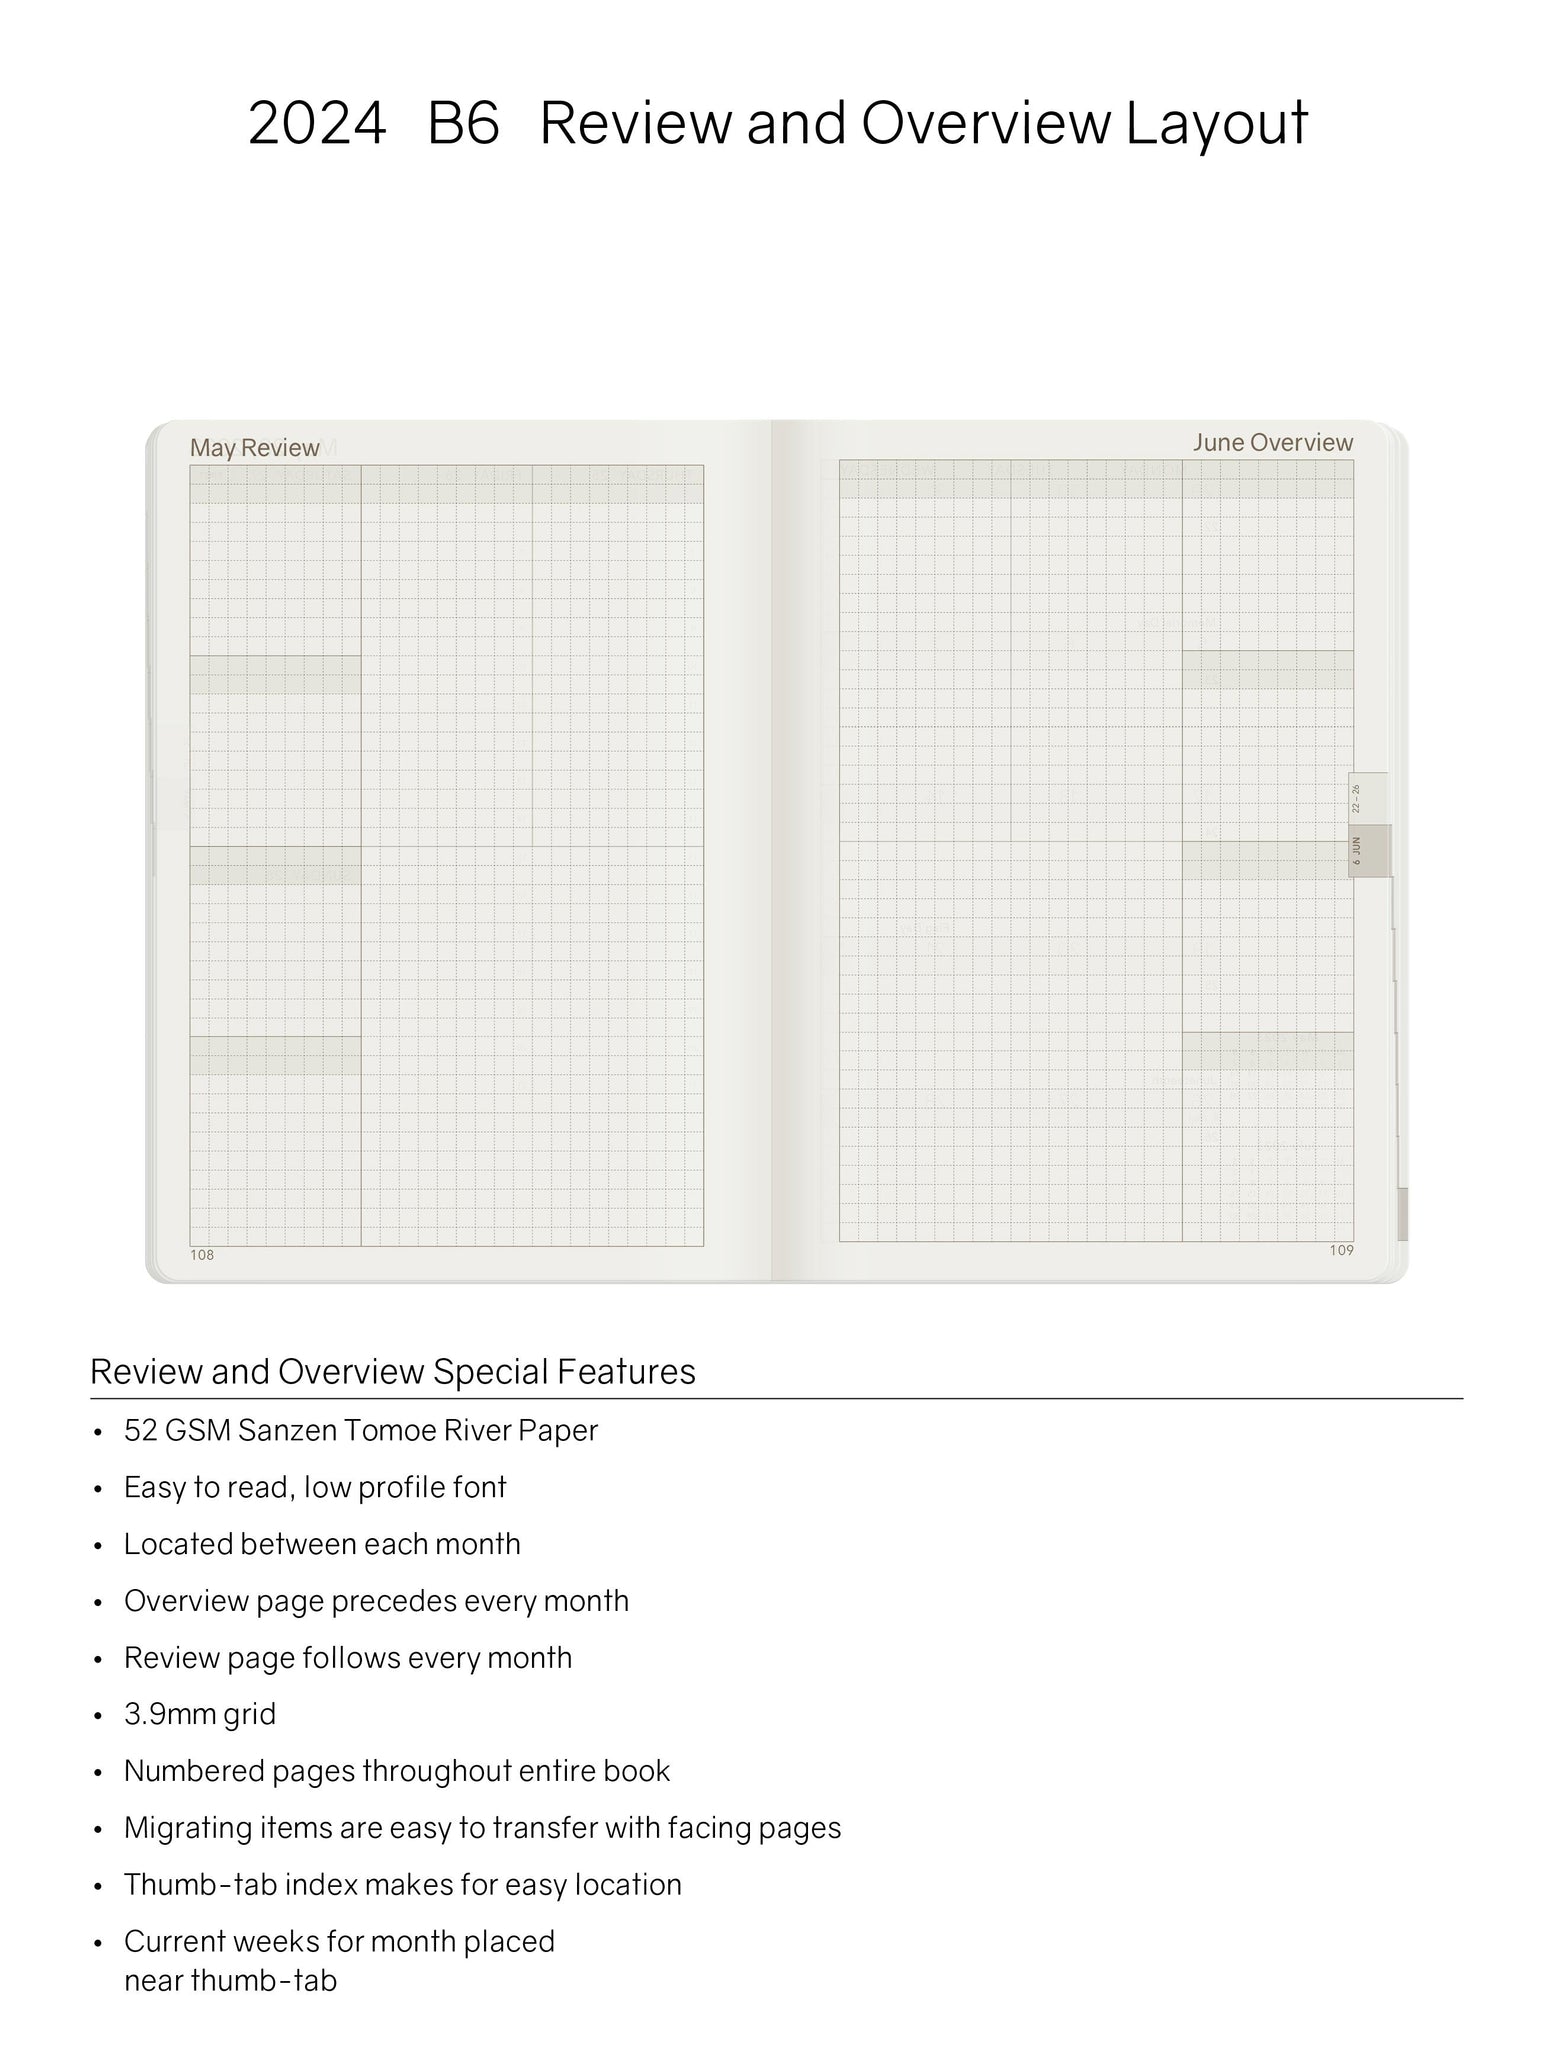 IMPERFECT | 2024 B6 Weekly Planner - 52gsm Tomoe River Paper (Stacked Weekends)